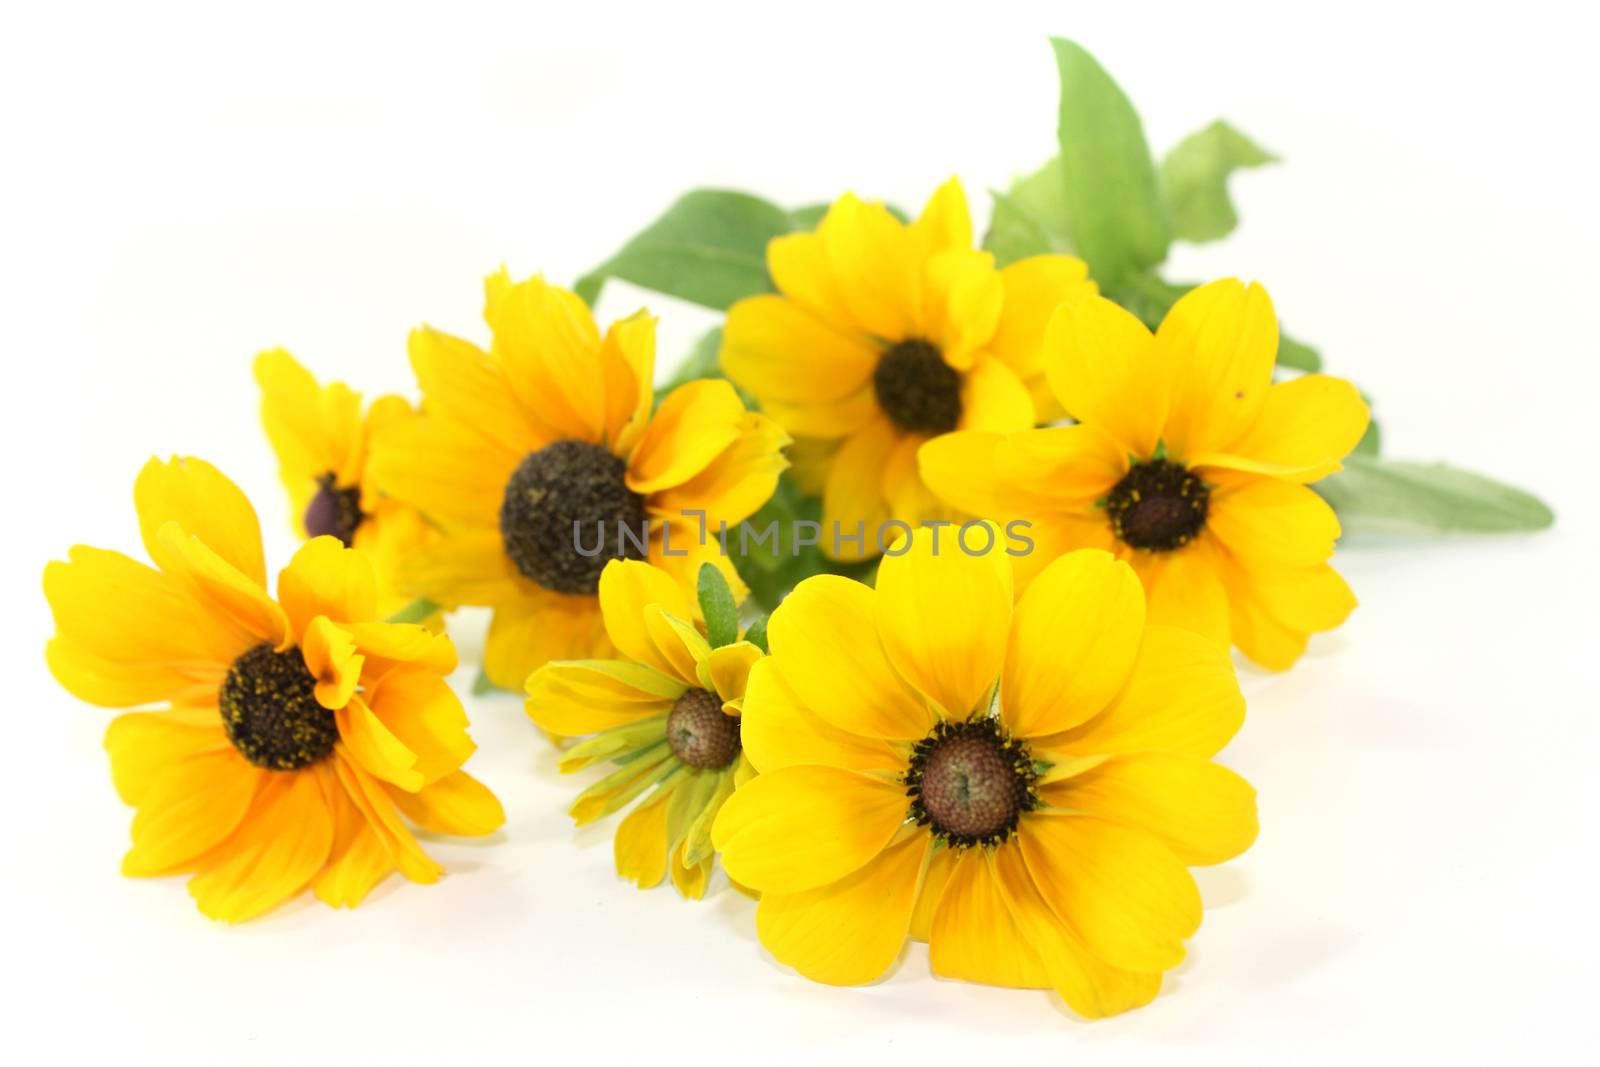 yellow coneflower on a white background